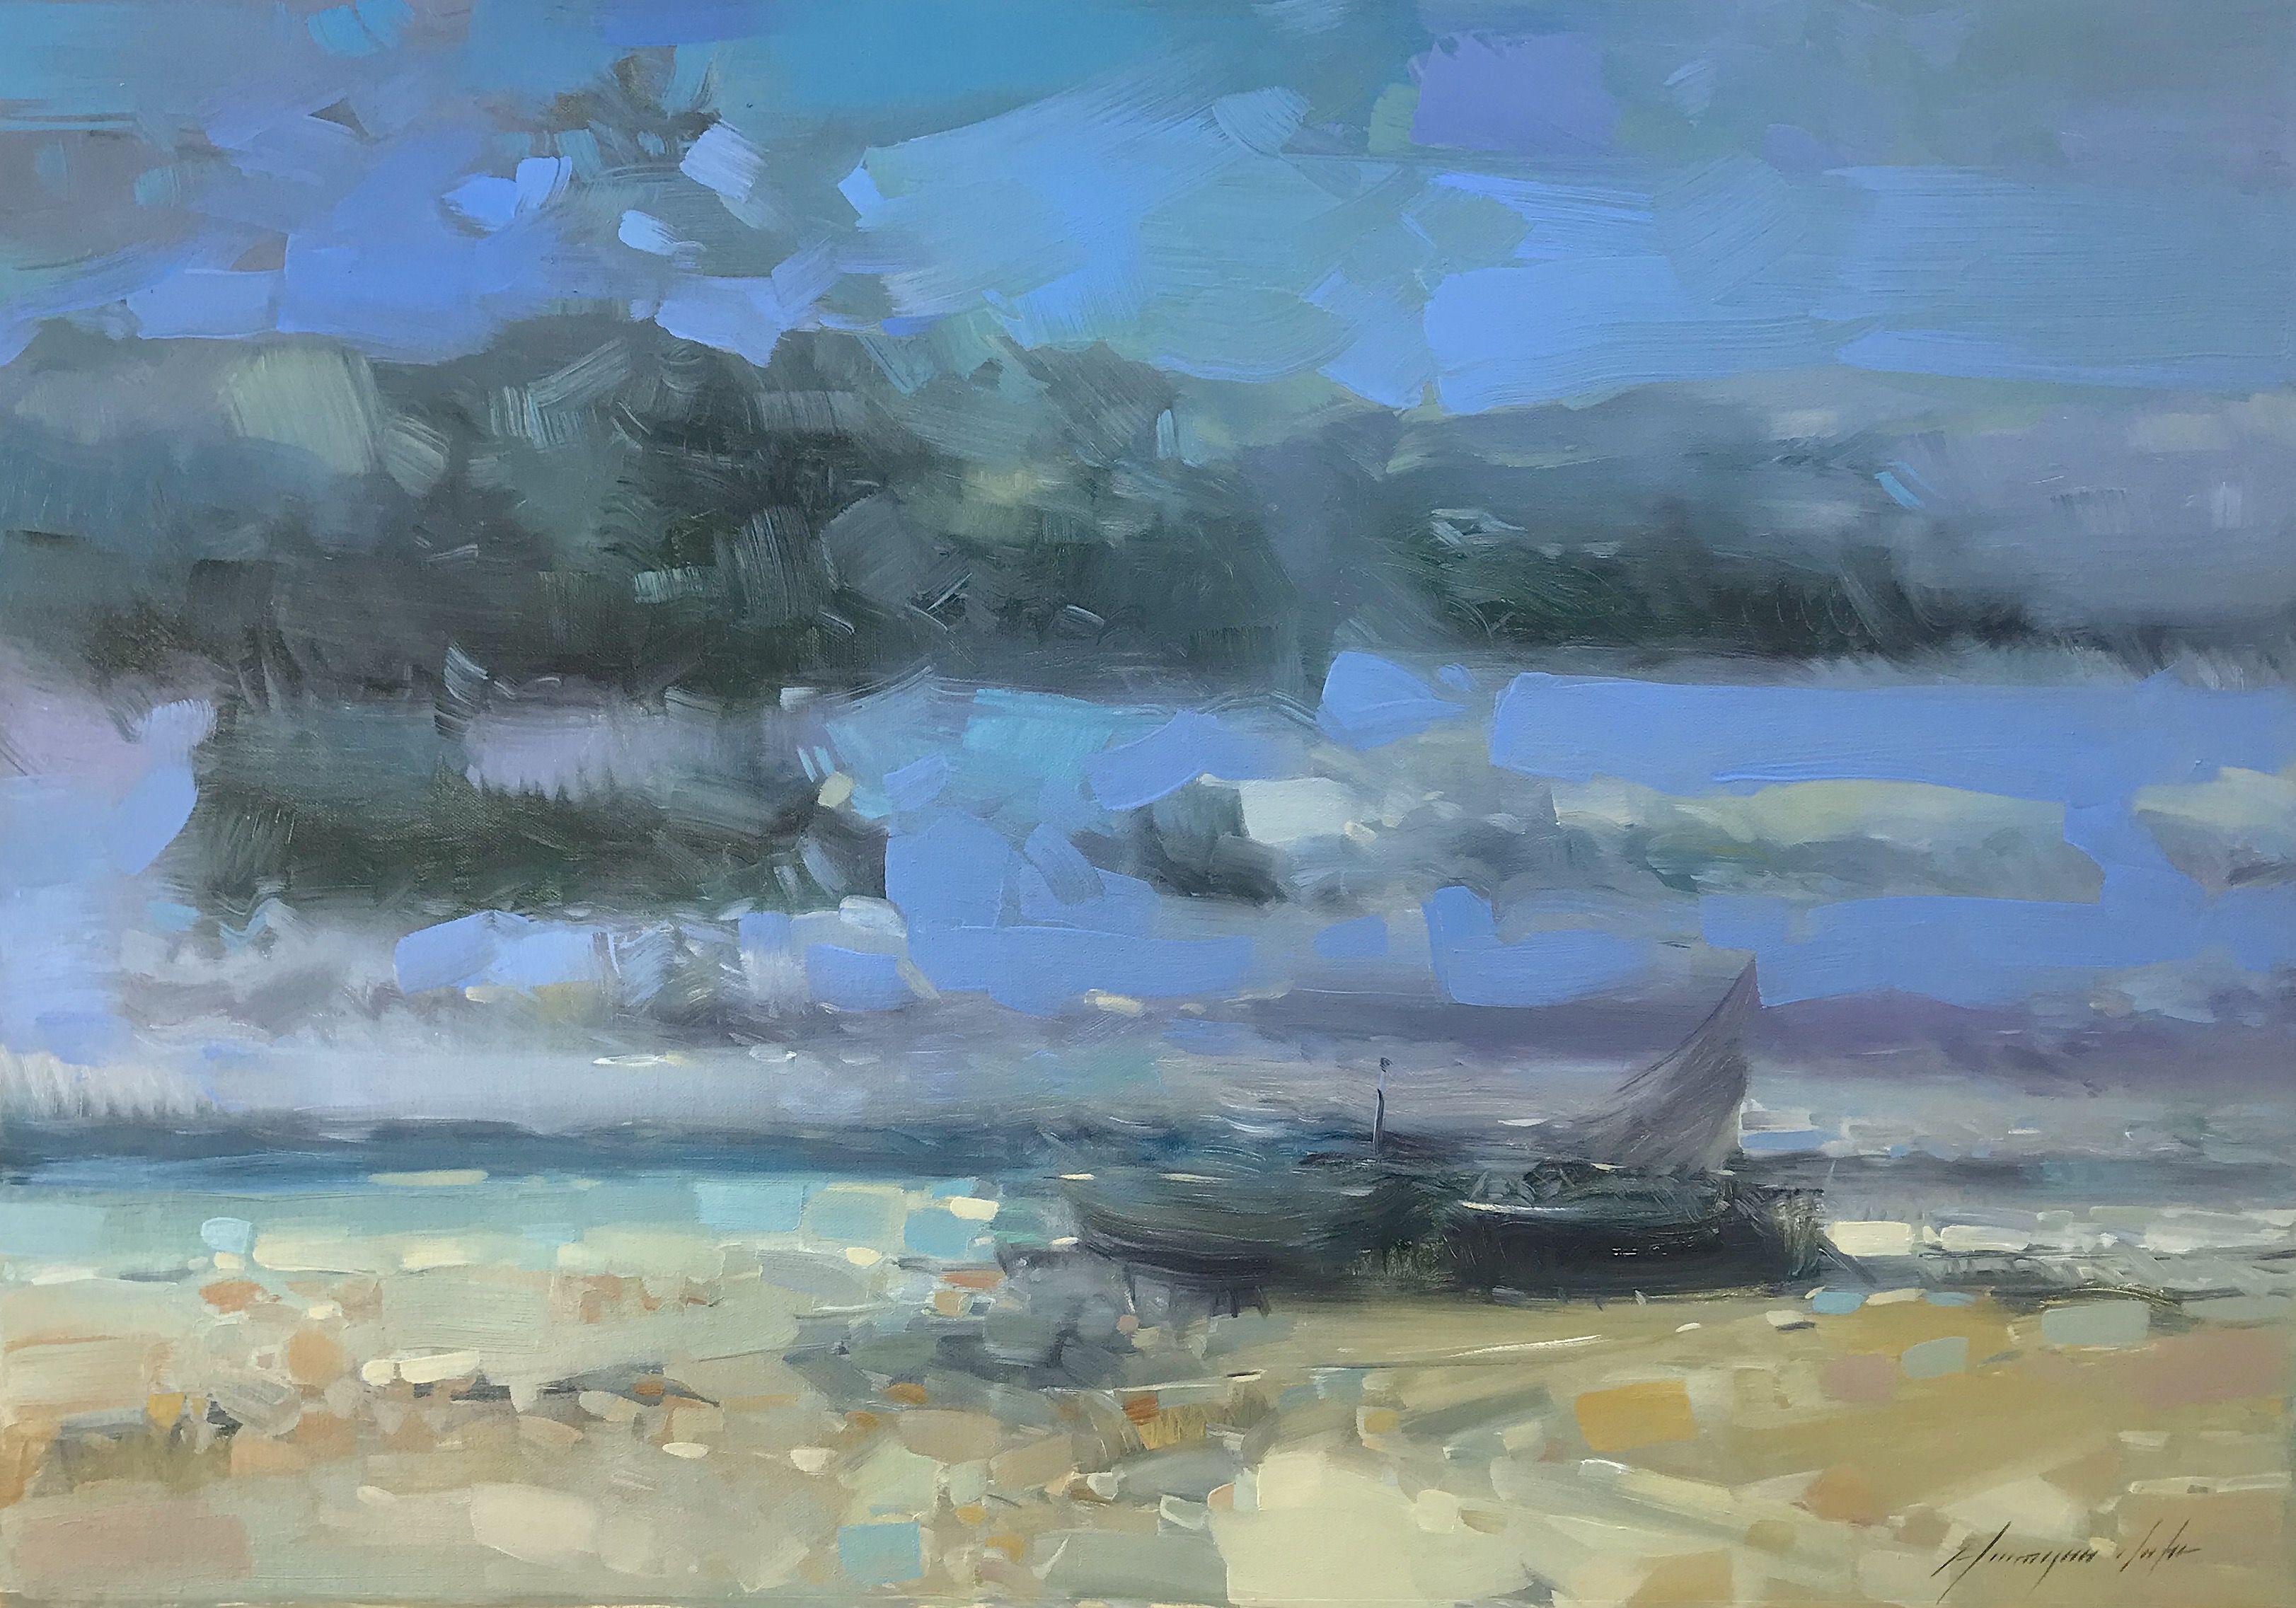 Artist: Vahe Yeremyan  Work: Original Oil Painting, Handmade Artwork, One of a Kind  Medium: Oil on Canvas  Year: 2020  Style: Impressionism,  Subject: Seashore,  Size: 21" x 30" x 0.75'' inch, 53x76x2 cm,  Unframed, Stretched on Wooden Bar, Gallery